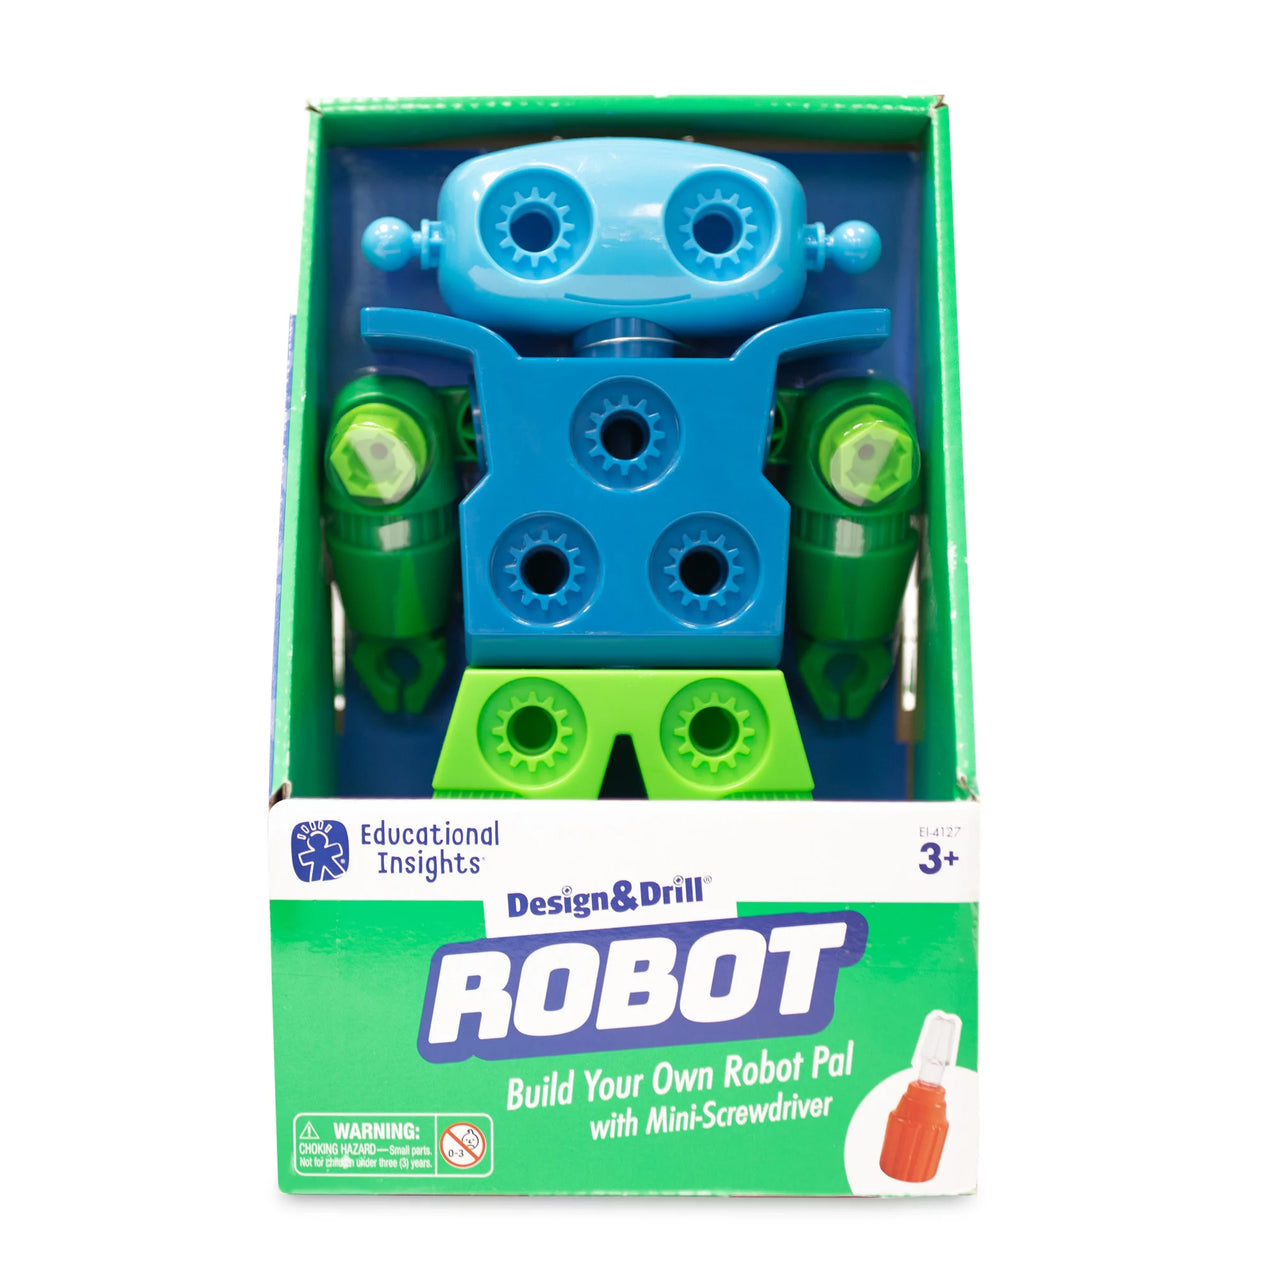 Educational Insights Design And Drill Robot Master Kids Company Educational Insights 